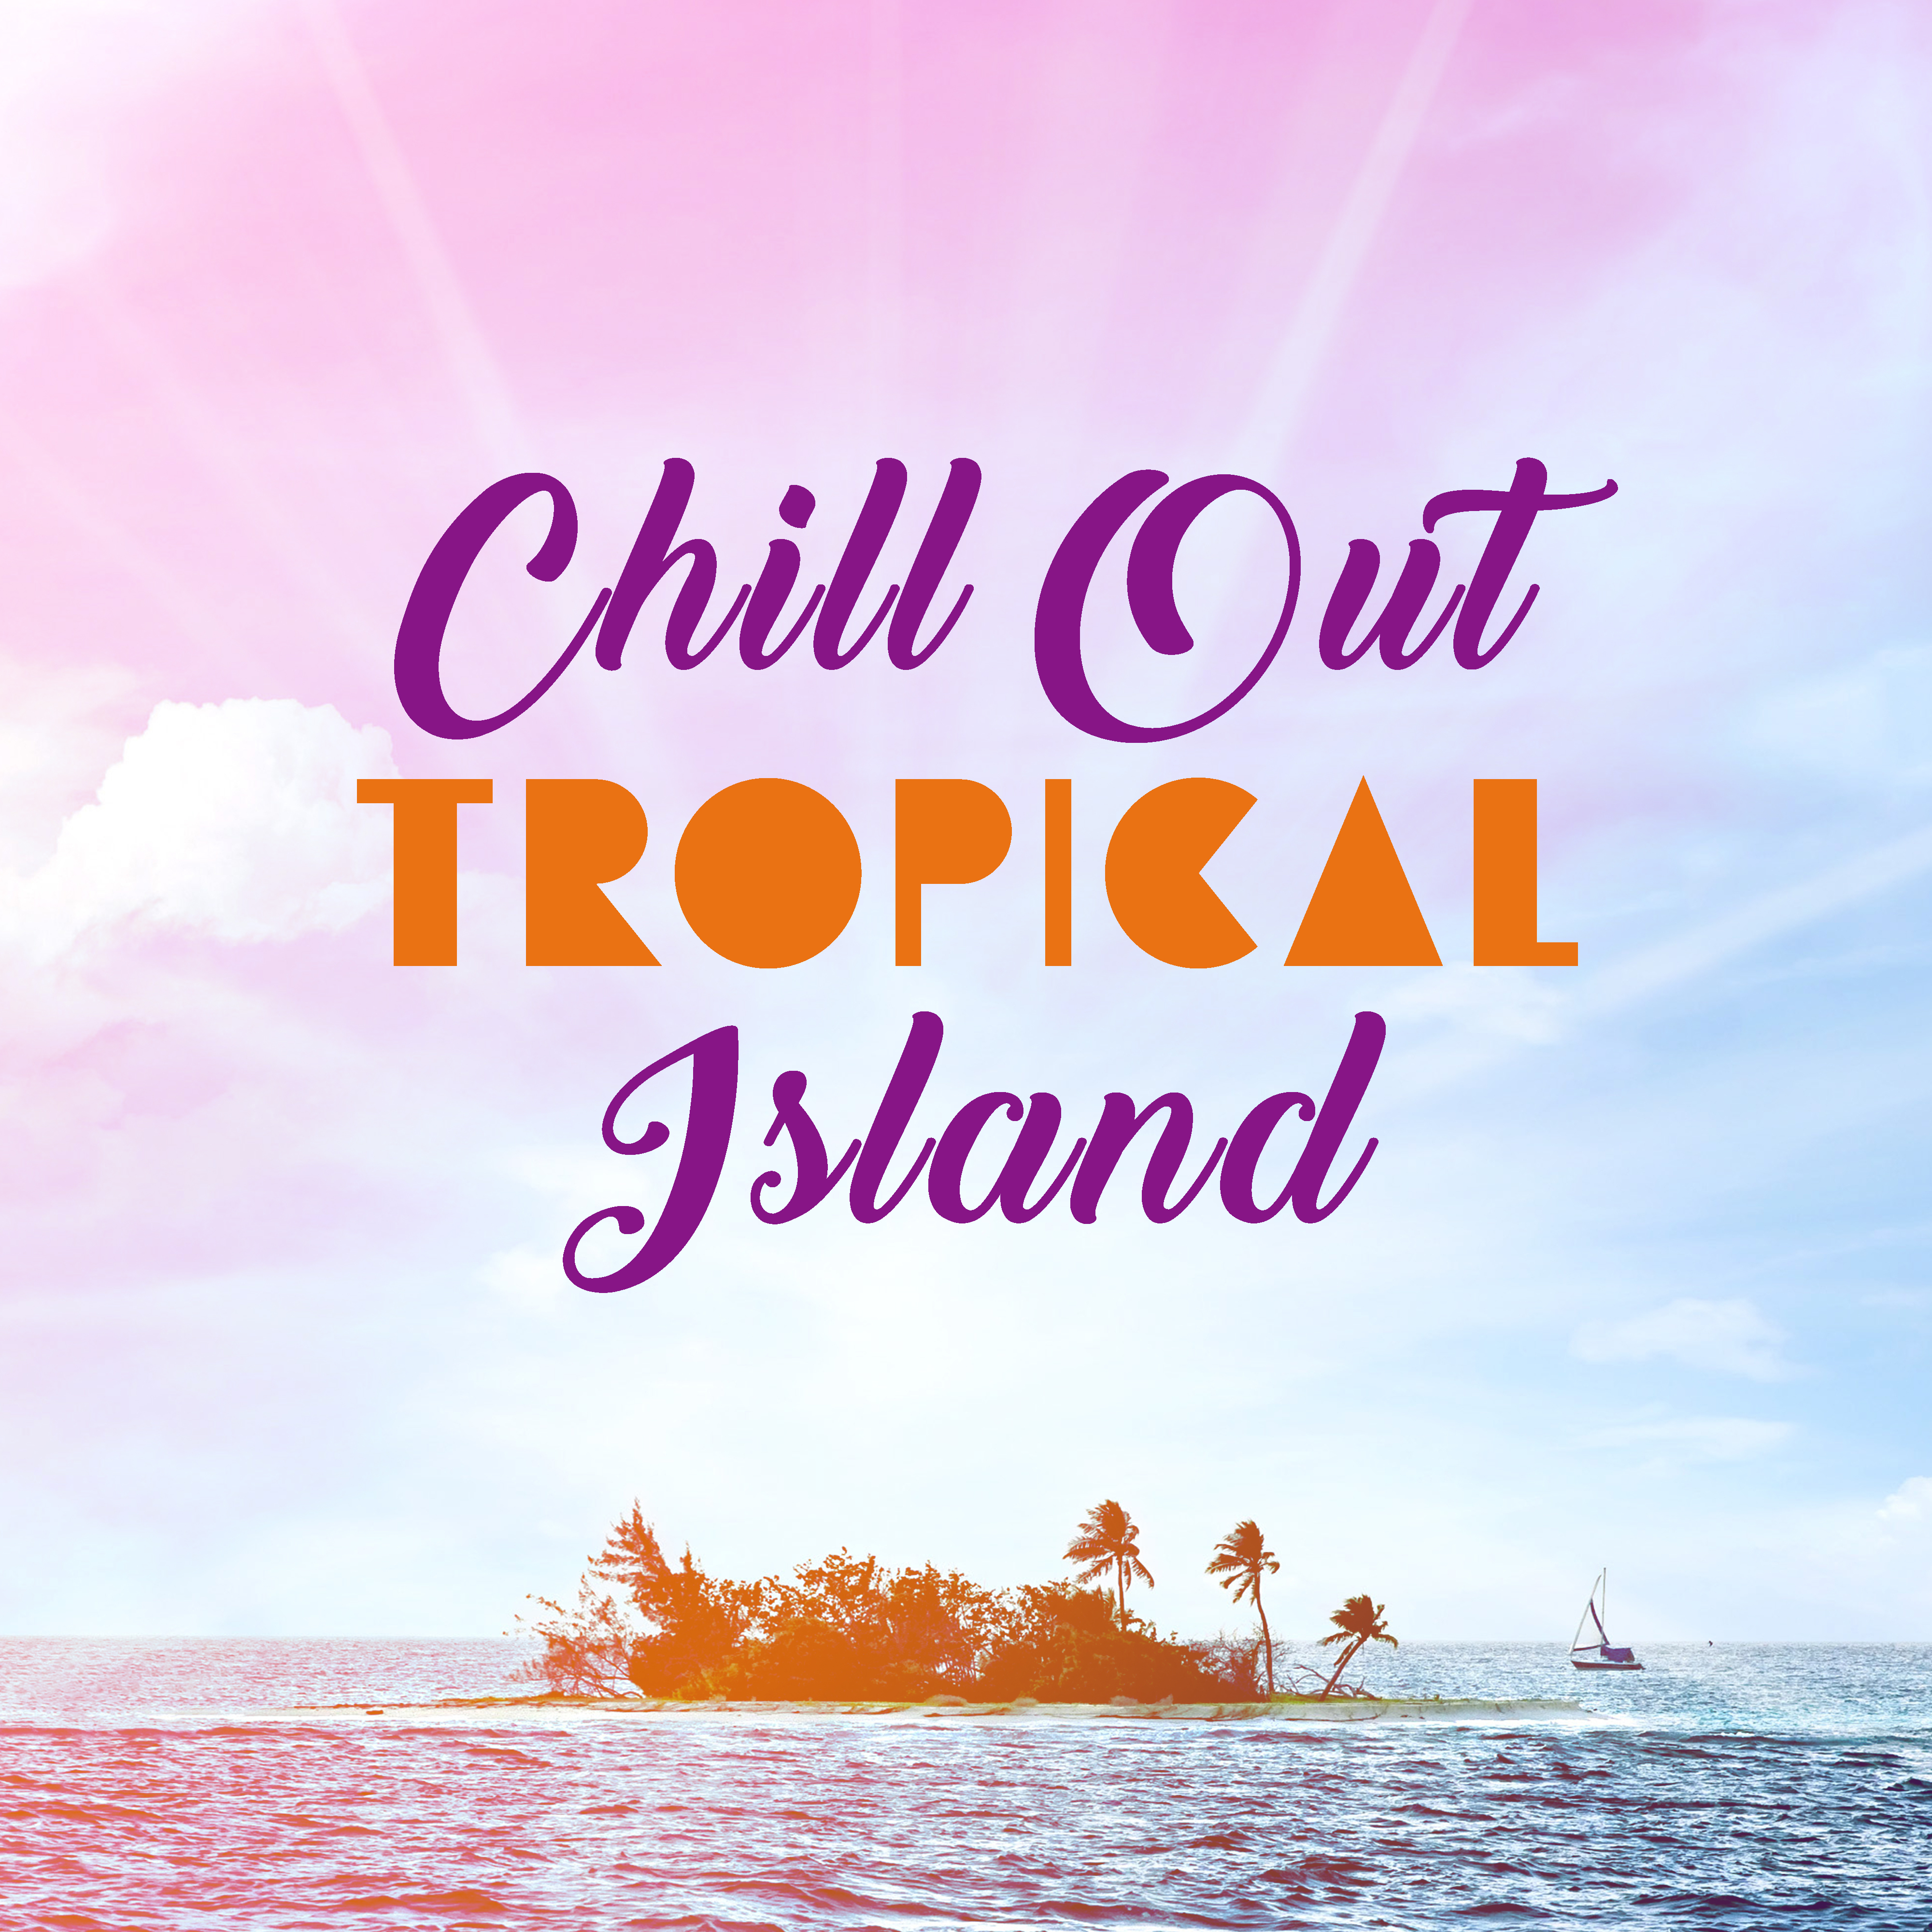 Chill Out Tropical Island  Peaceful Sounds, Exotic Chill Out Beats, Relaxing Journey, Stress Relief